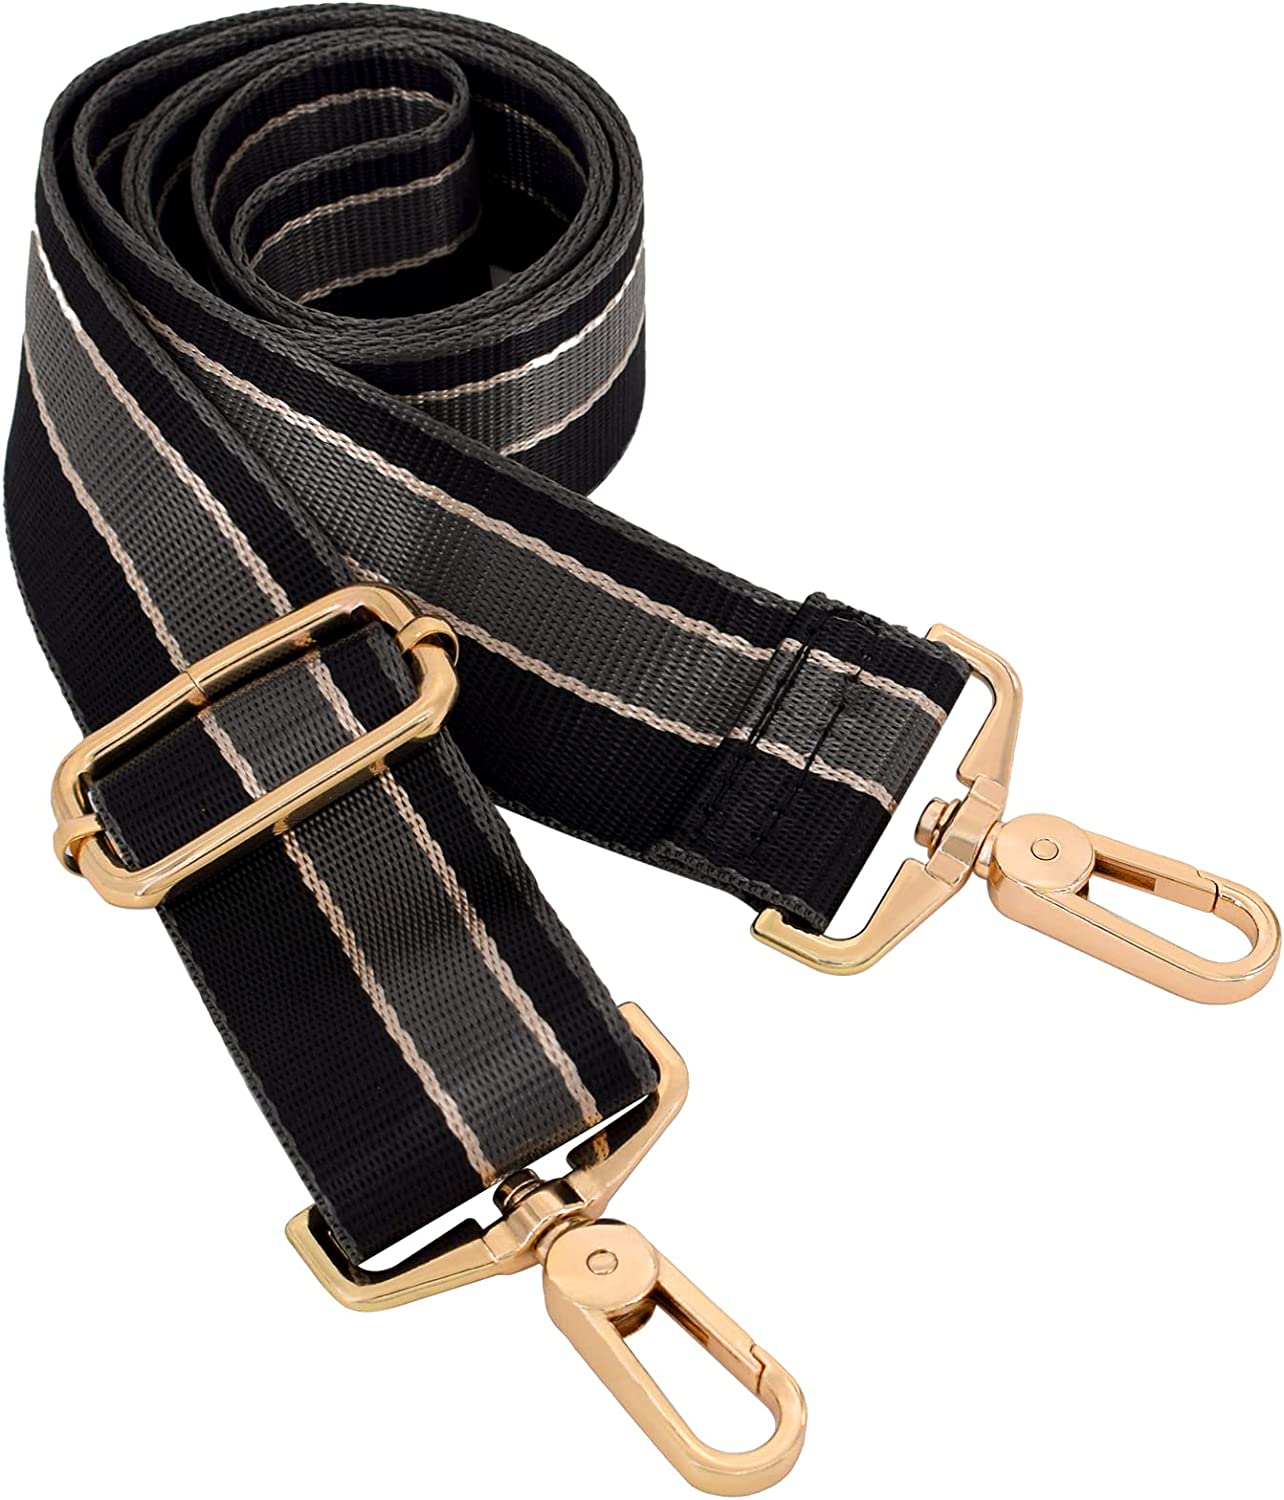 Handbag Strap Replacement Wholesale In China